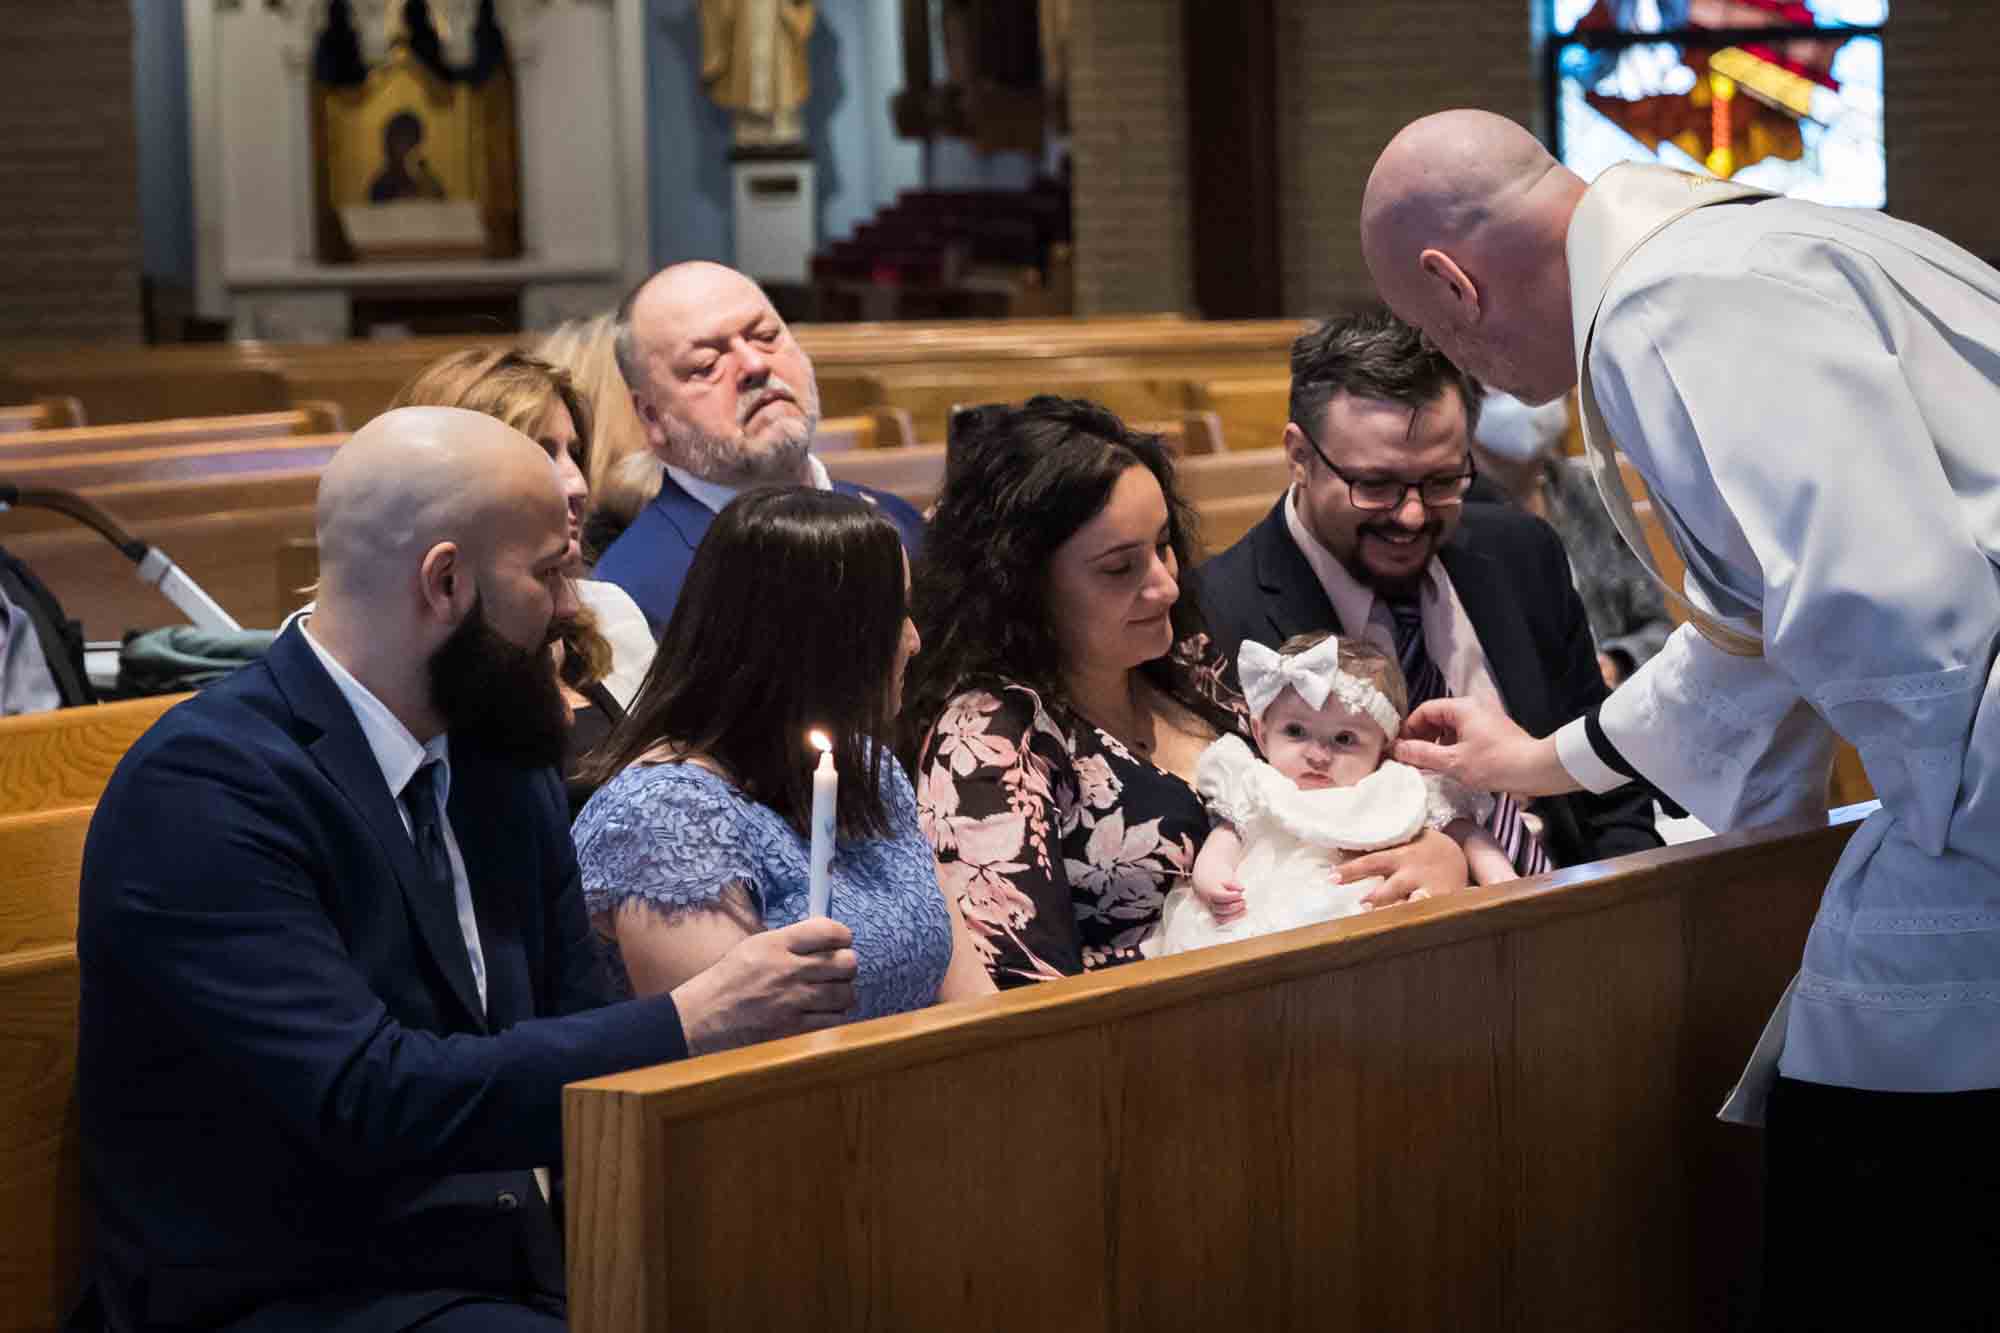 Maspeth baptism photos of priest anointing baby's head with oil in front of family